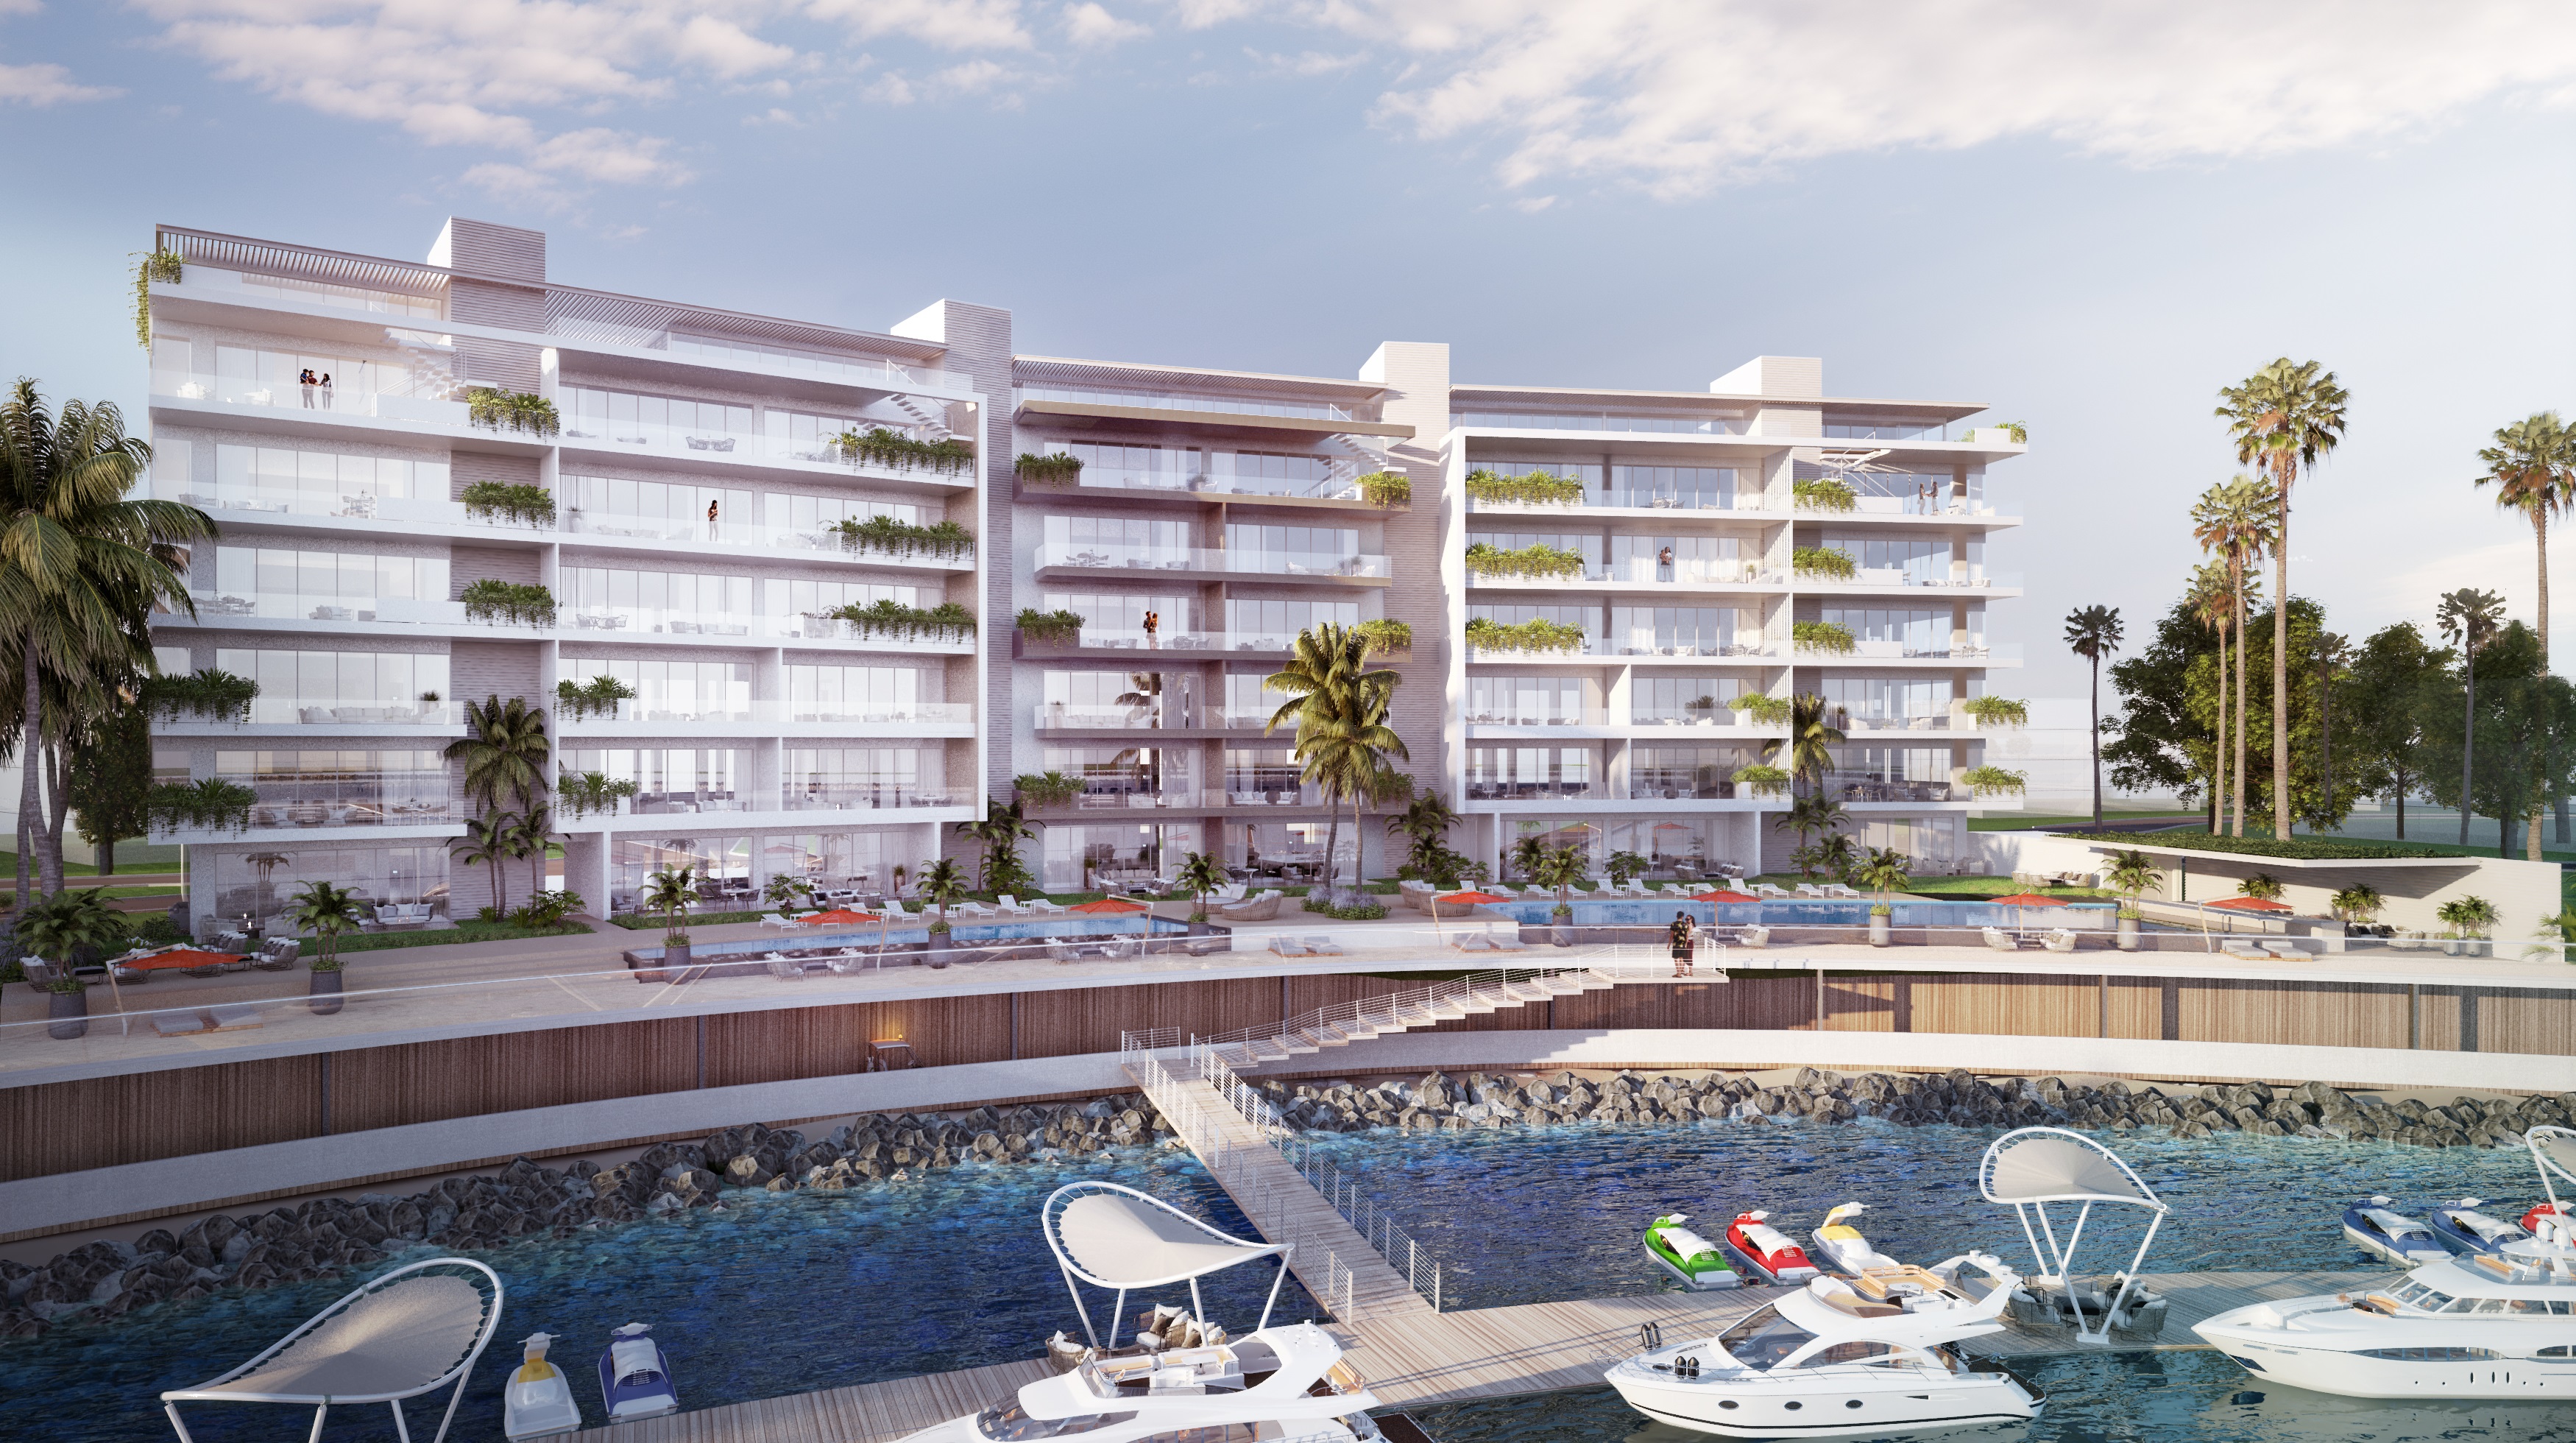 Beach Club Project Launches on Panama City's Man-Made Islands | Newswire